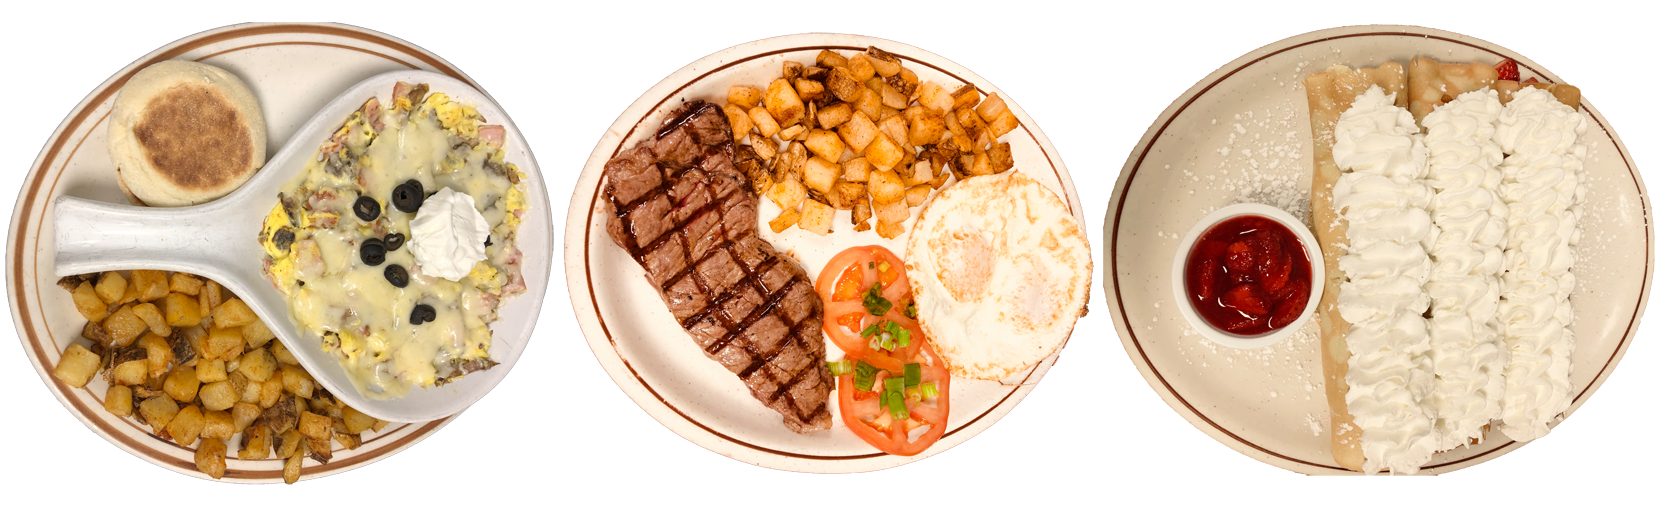 Eggs, Steak, Hashbrowns, and Crepes